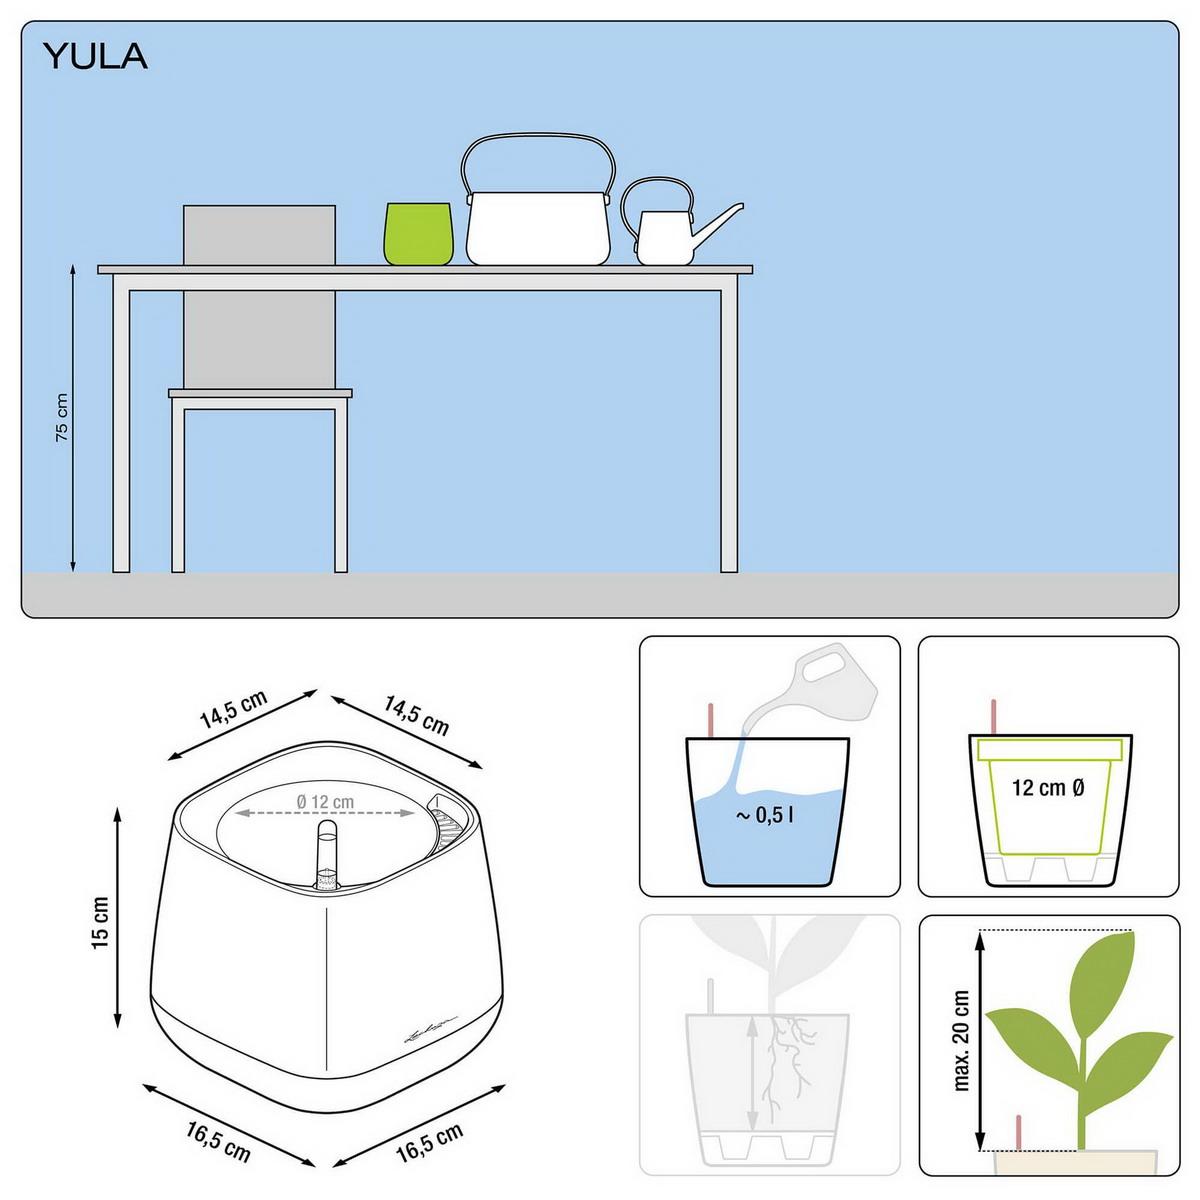 LECHUZA YULA Plant Bag White/Green Semi-Gloss Poly Resin Floor Self-watering Planter with Water Level Indicator H18 L38 W17 cm, 4.5L - citiplants.com